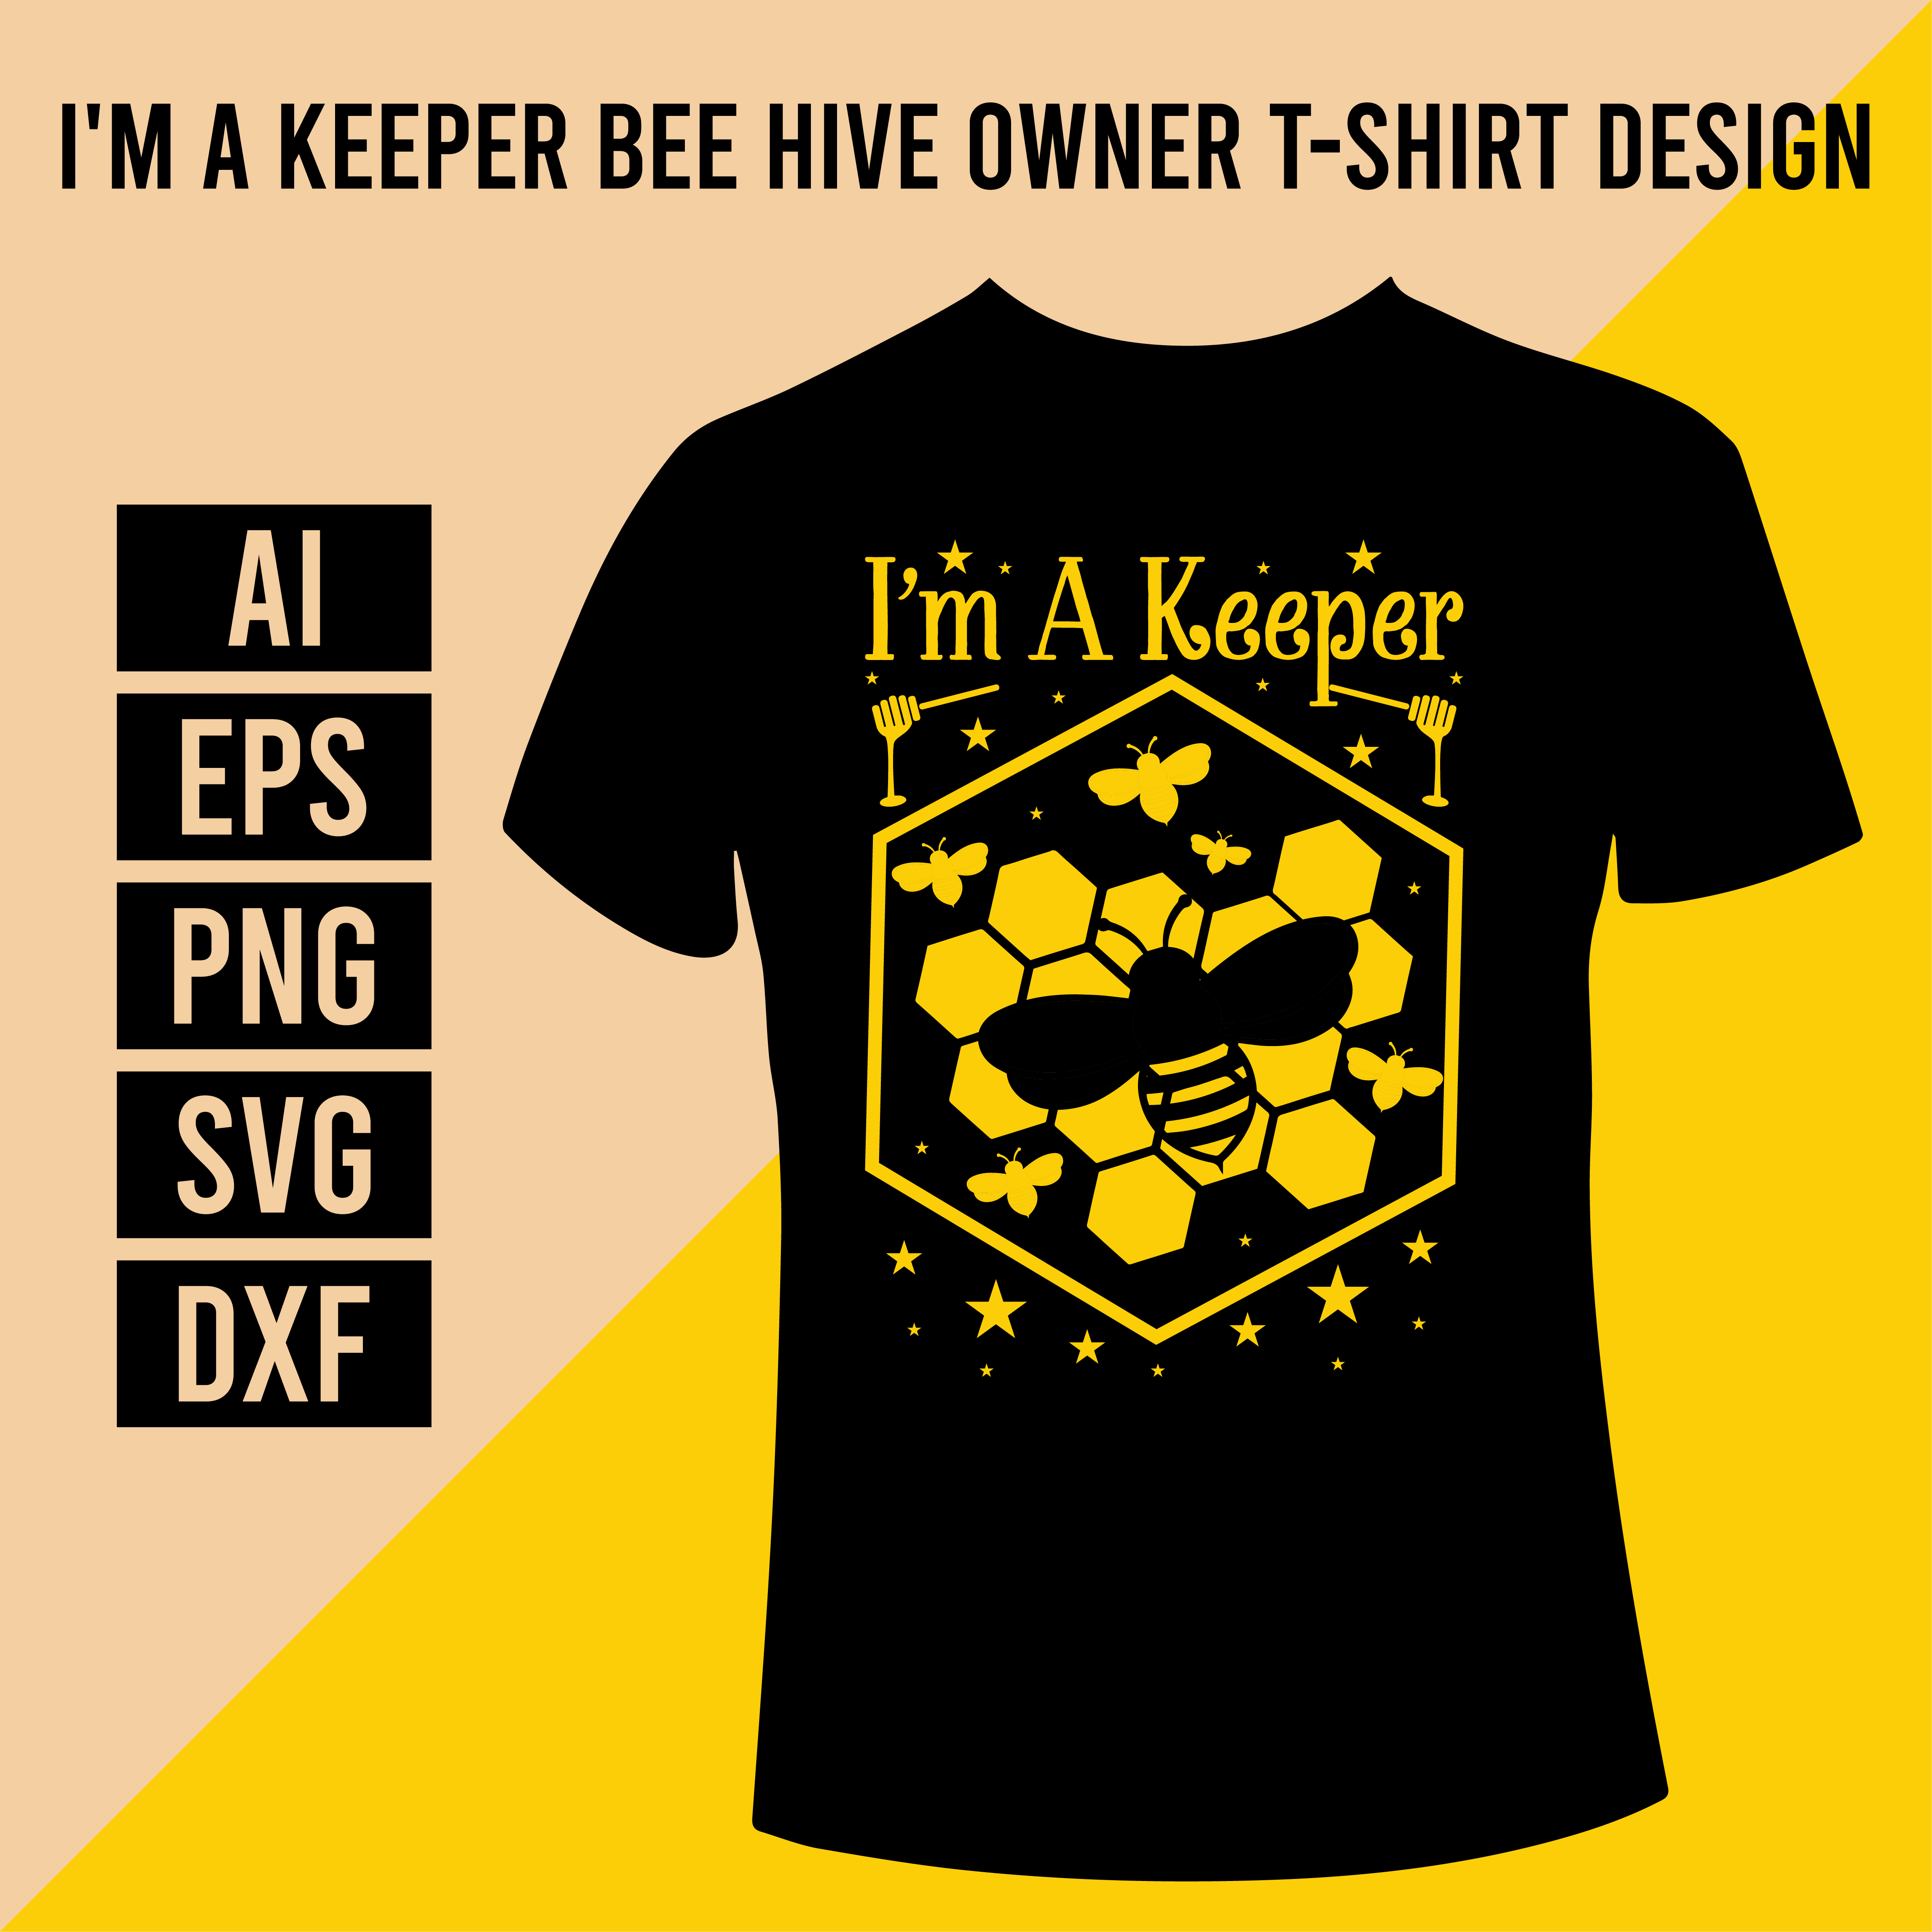 I'm A Keeper Bee Hive Owner T- Shirt Design.